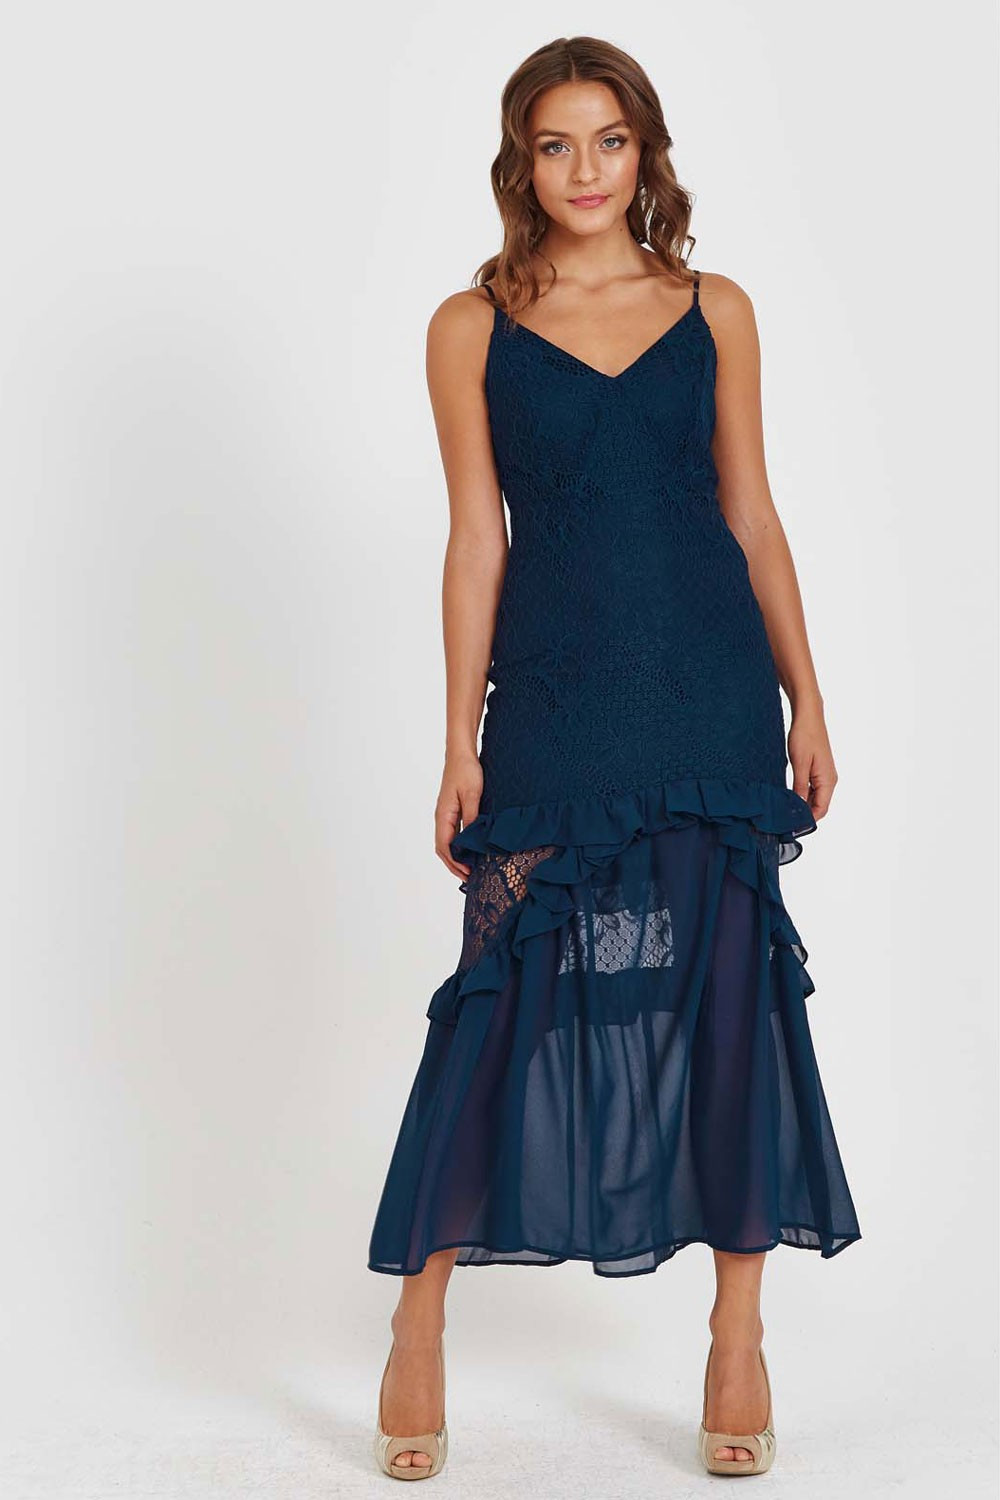 Wedding Guest Dresses For Winter
 35 Winter Wedding Guest Dresses Our Top Picks hitched